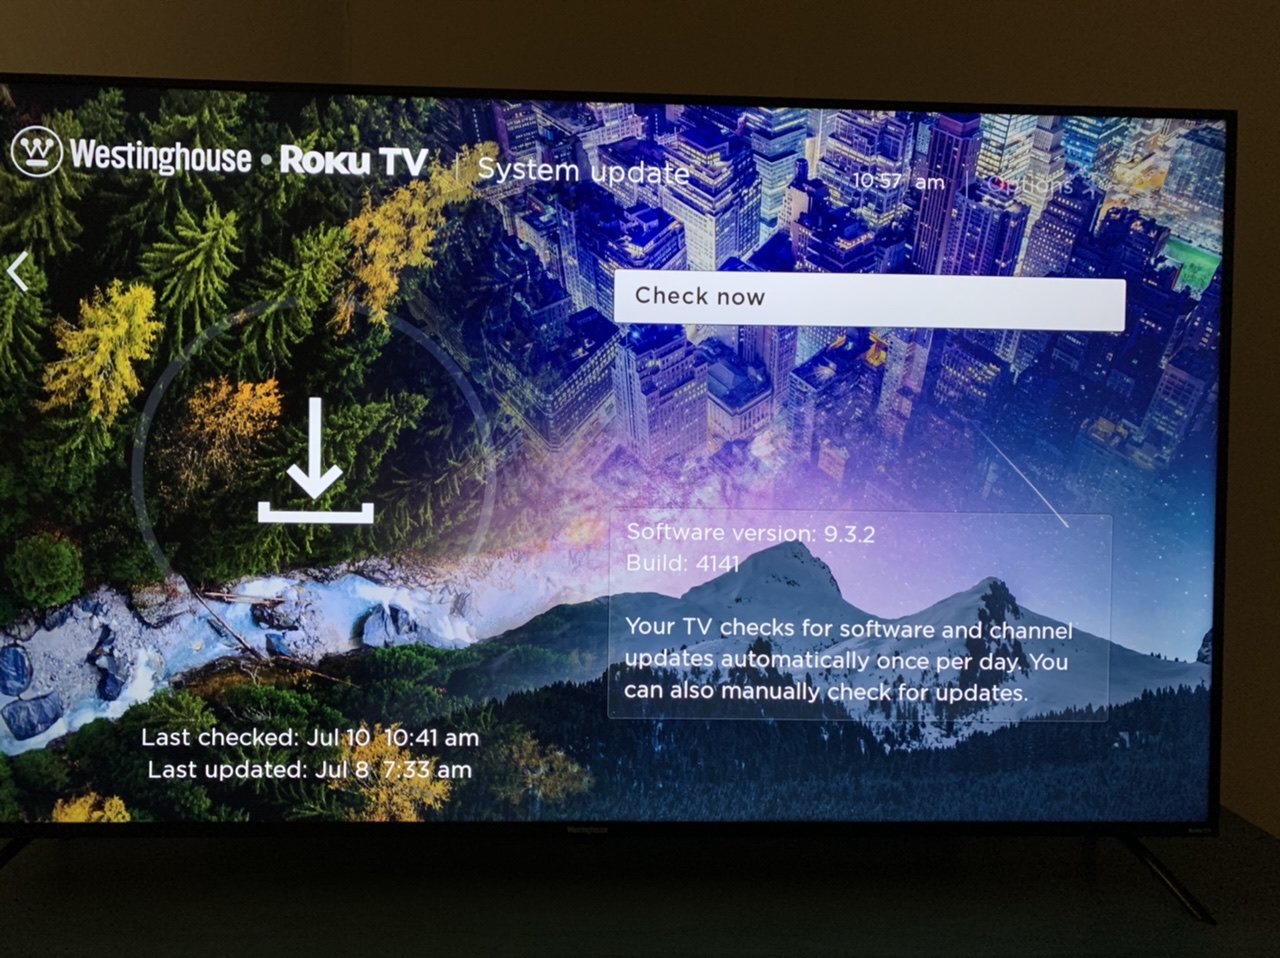 hooking up a wii to a roku tv